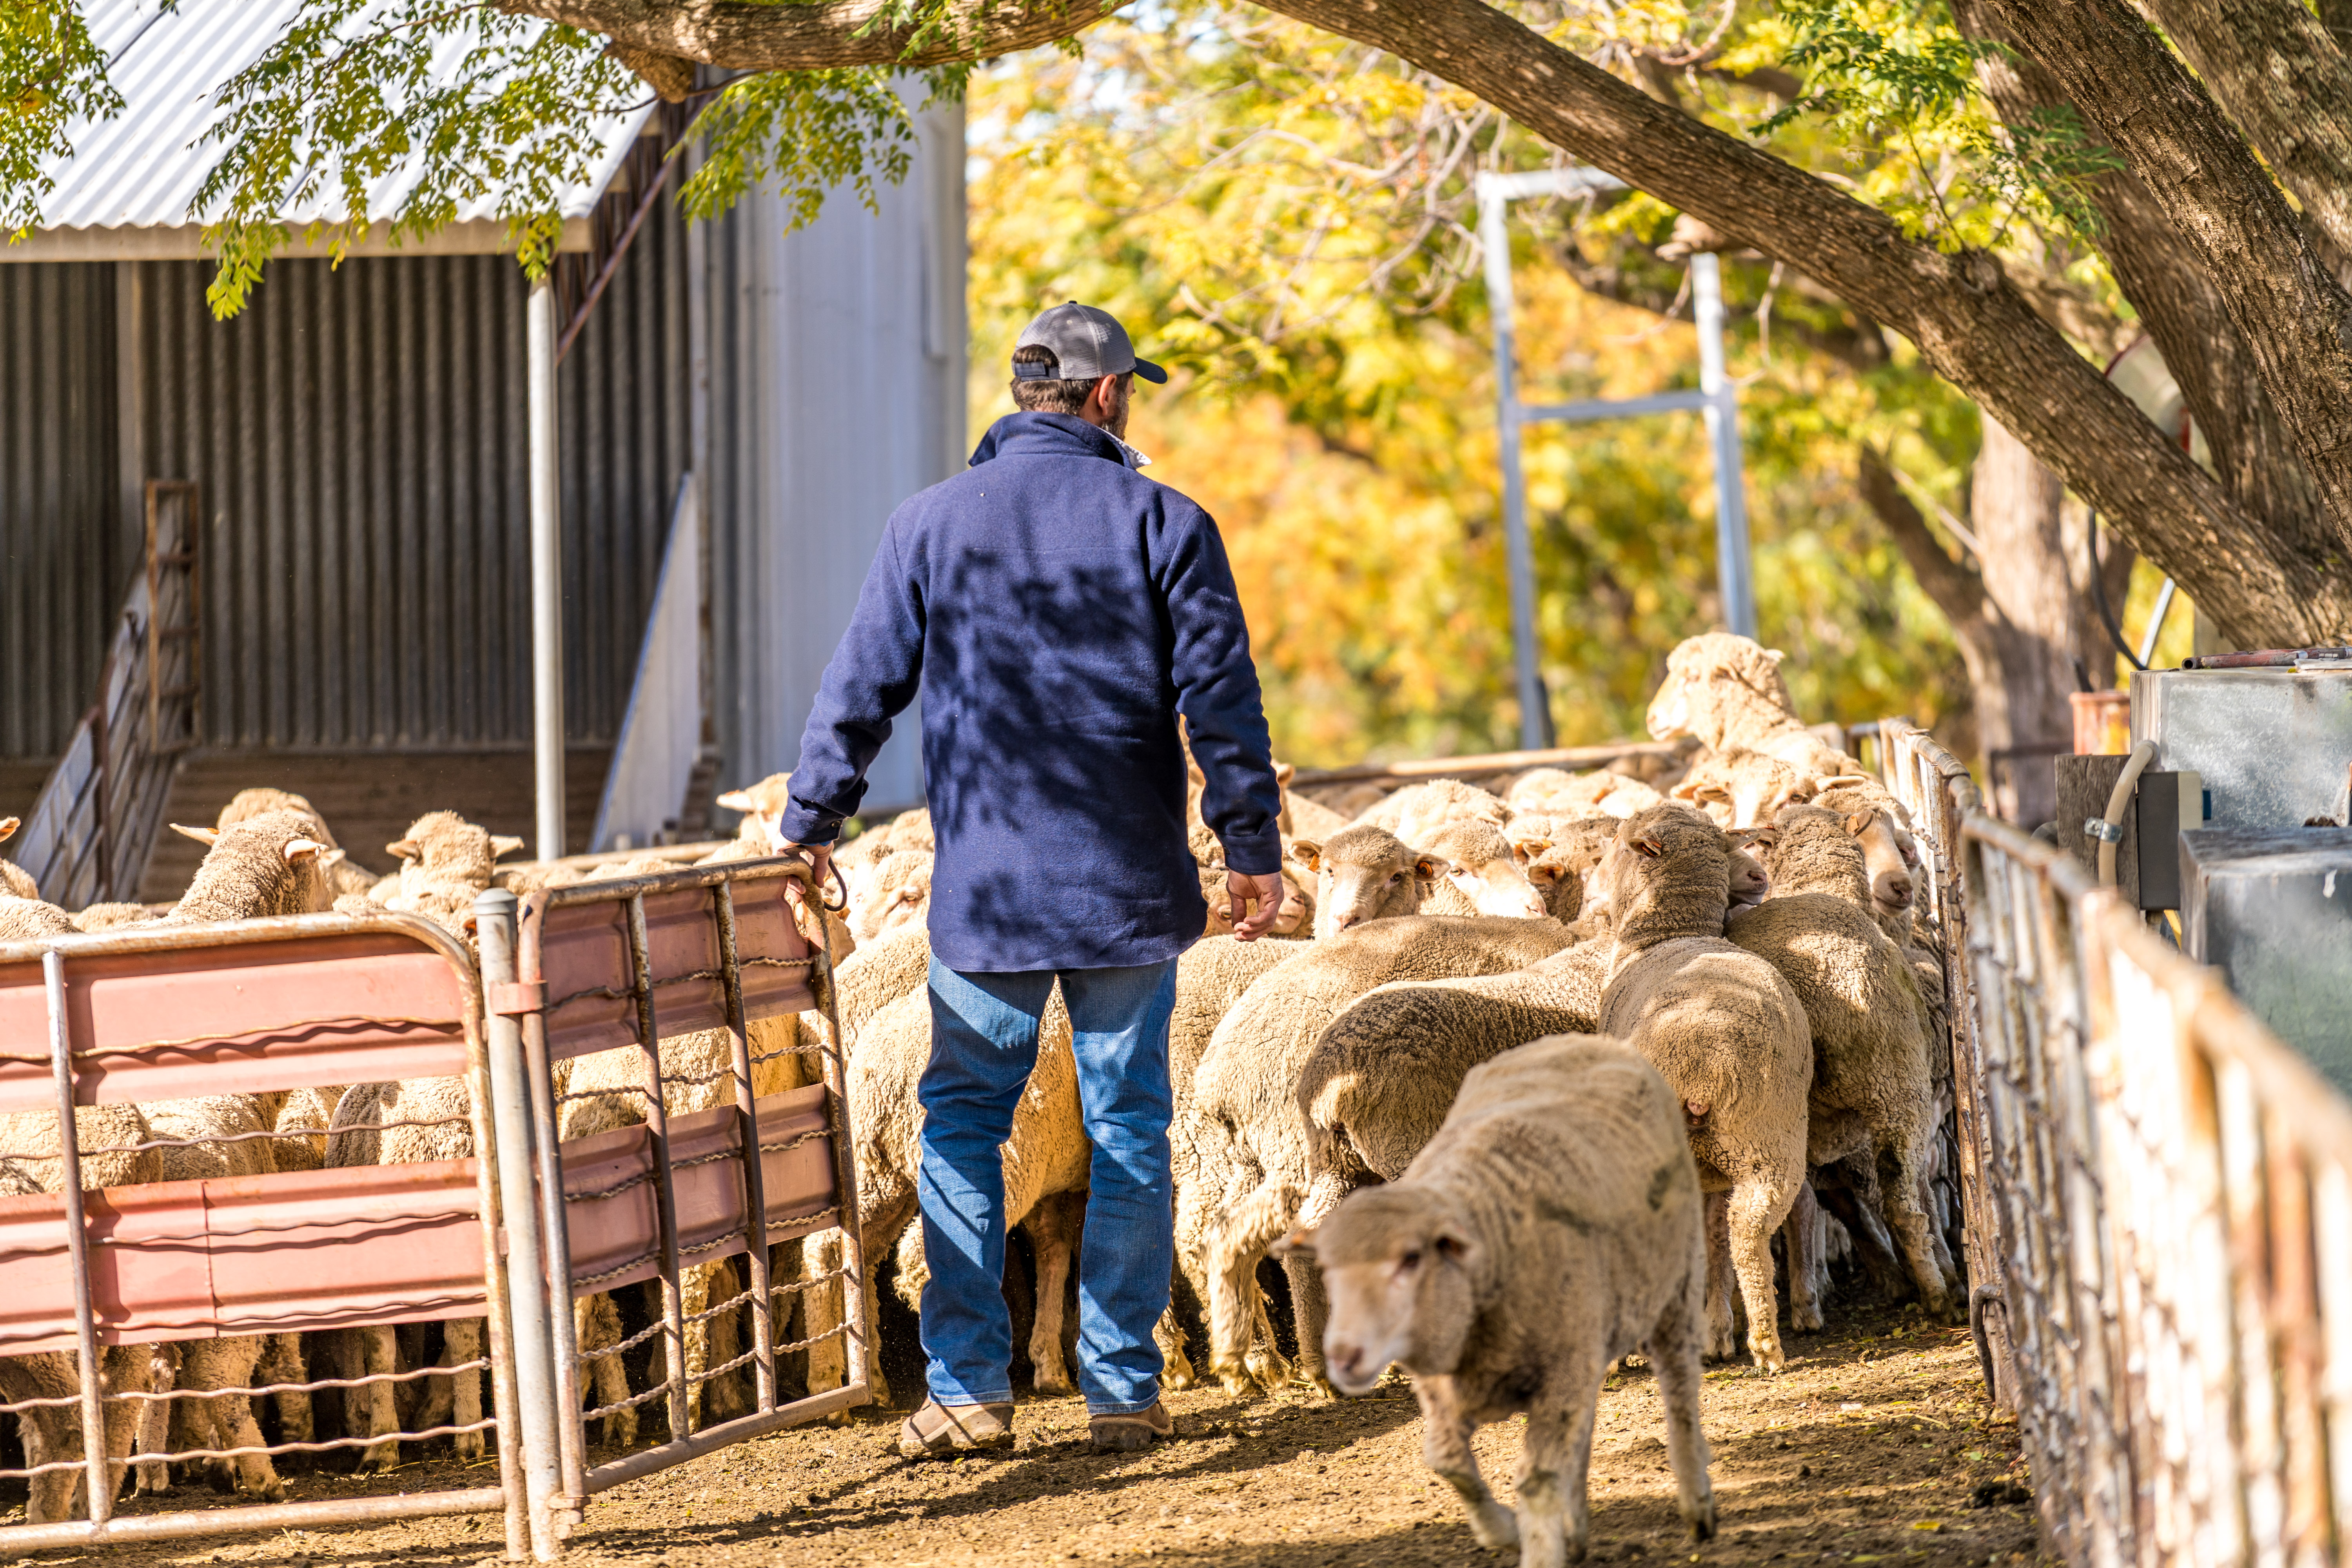 Sheep at Cowra Agricultural Research and Advisory Station 